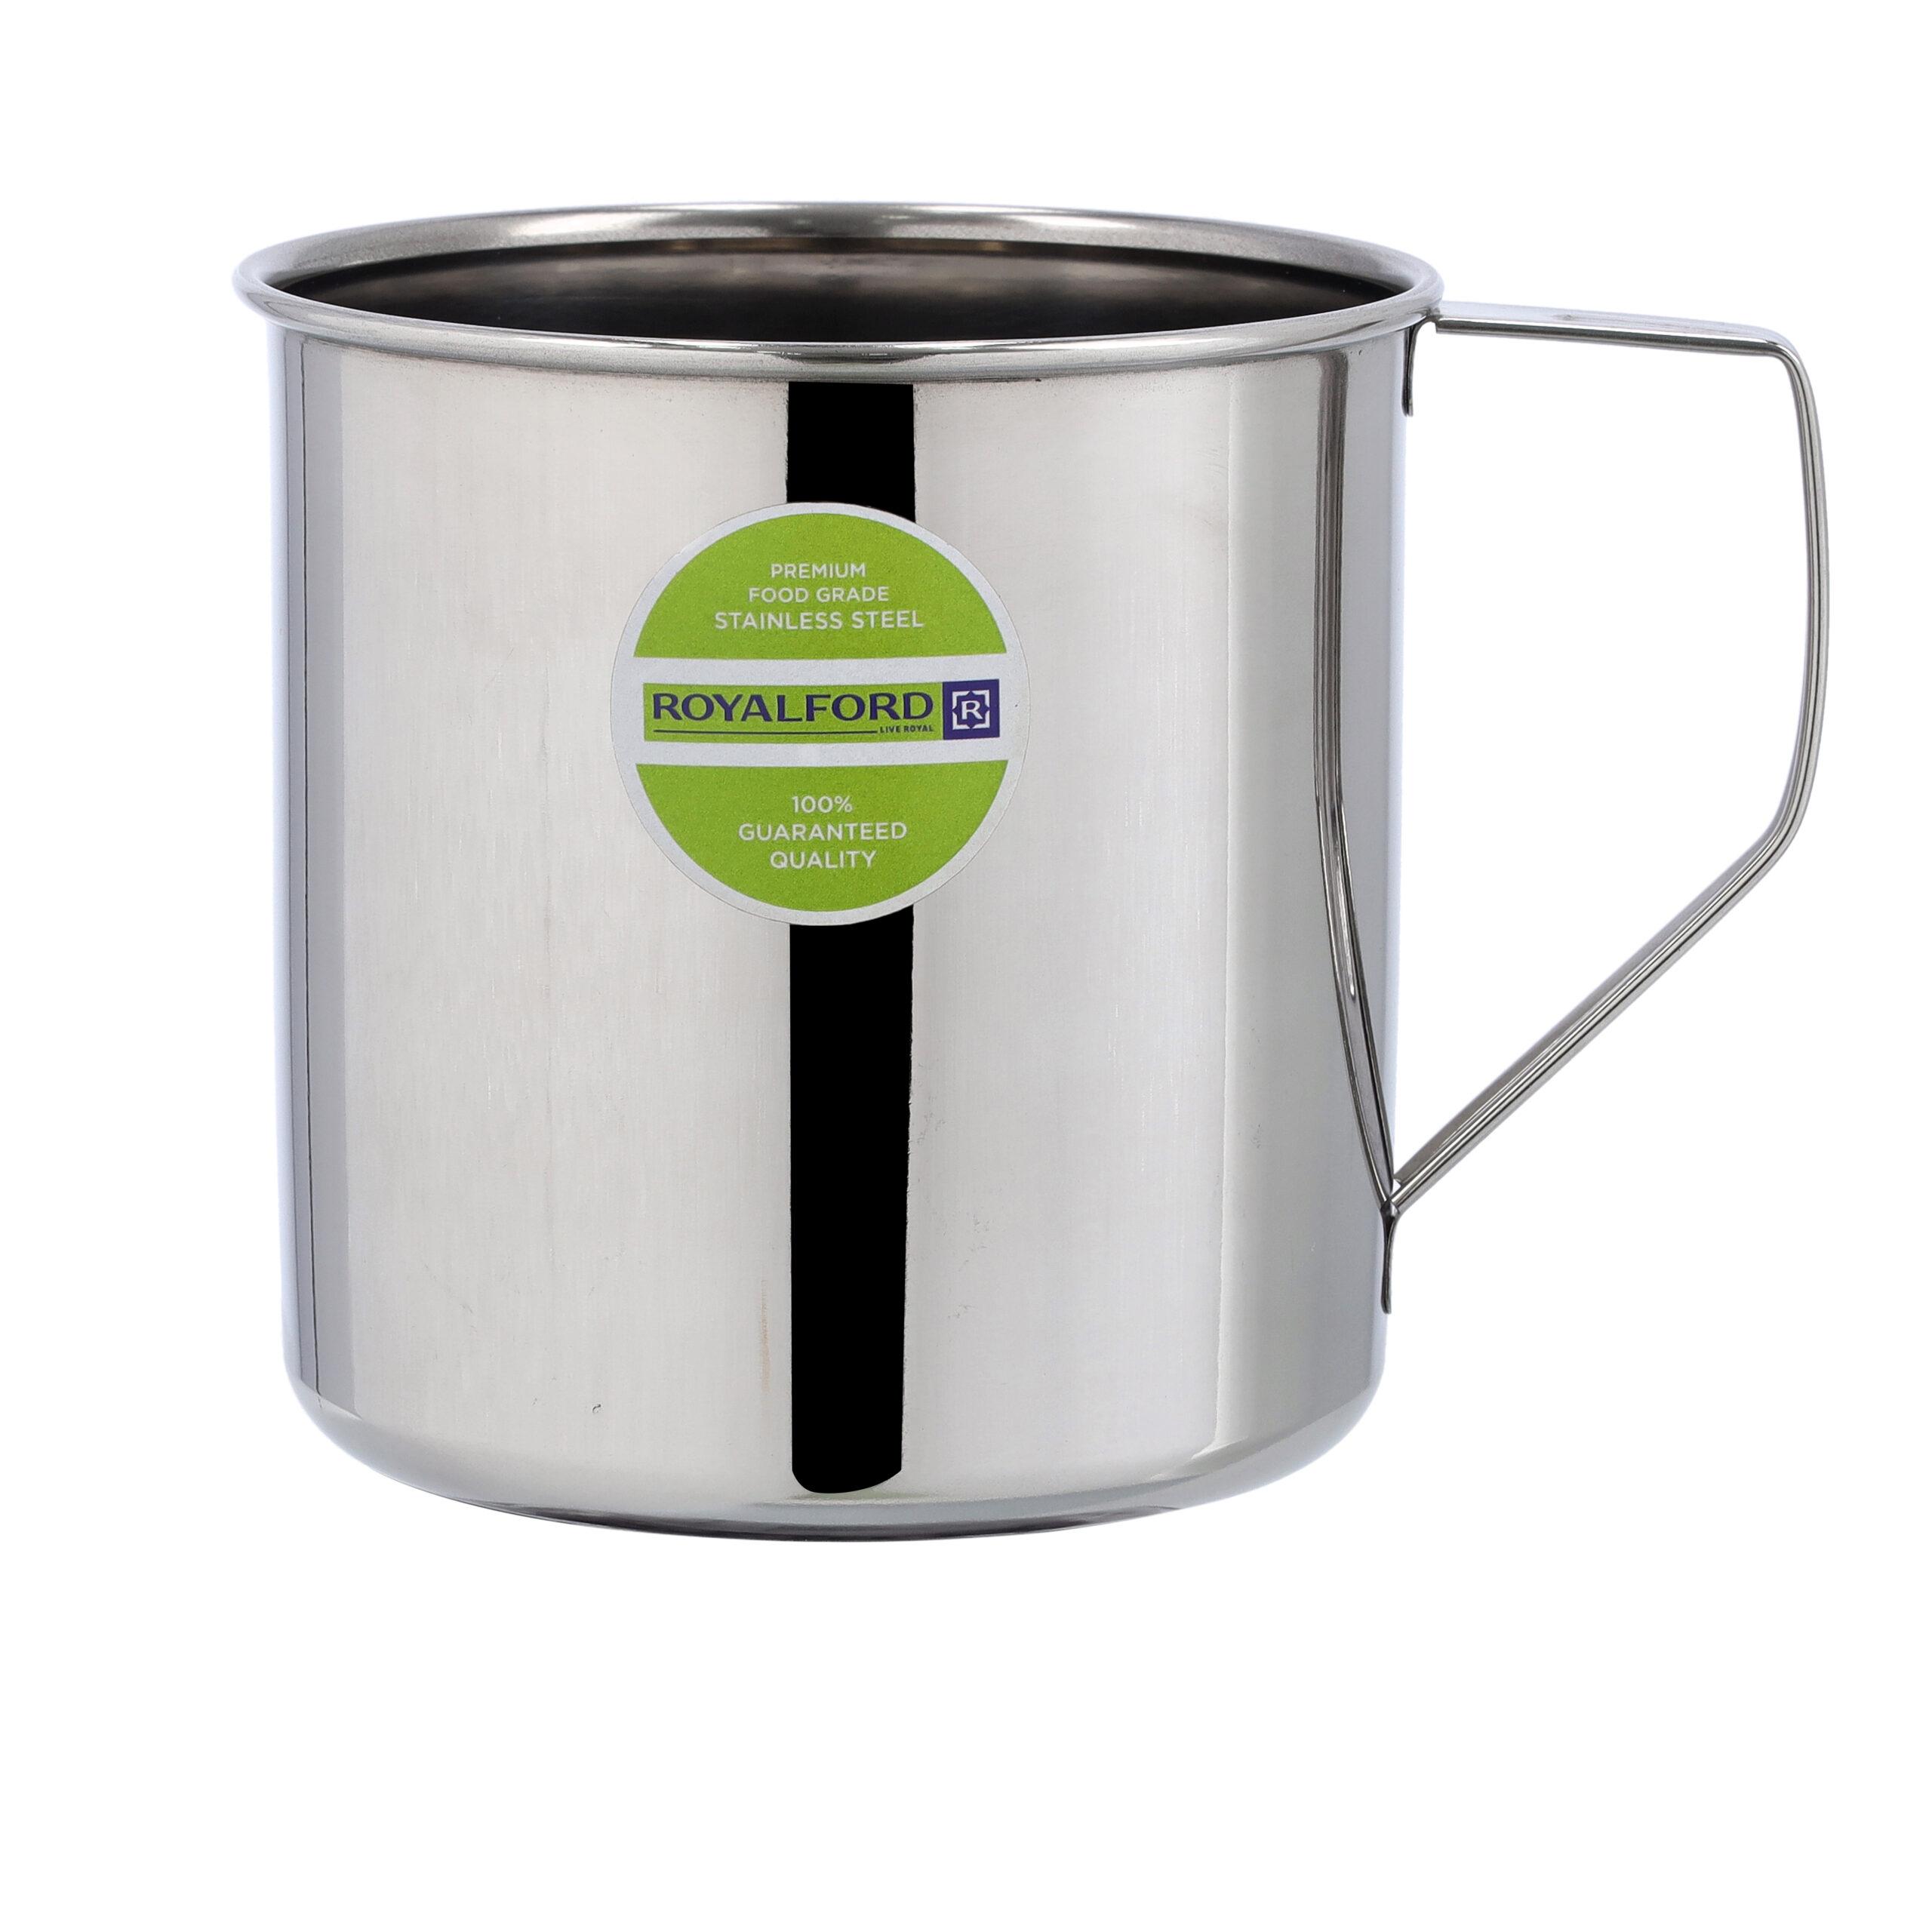 Royalford Stainless Steel Rainbow Mug with Strong Handle | RF10147 | 11 cm | Ideal for Coffee, Tea, Milk and Water | Premium Quality | 100% Food Grade